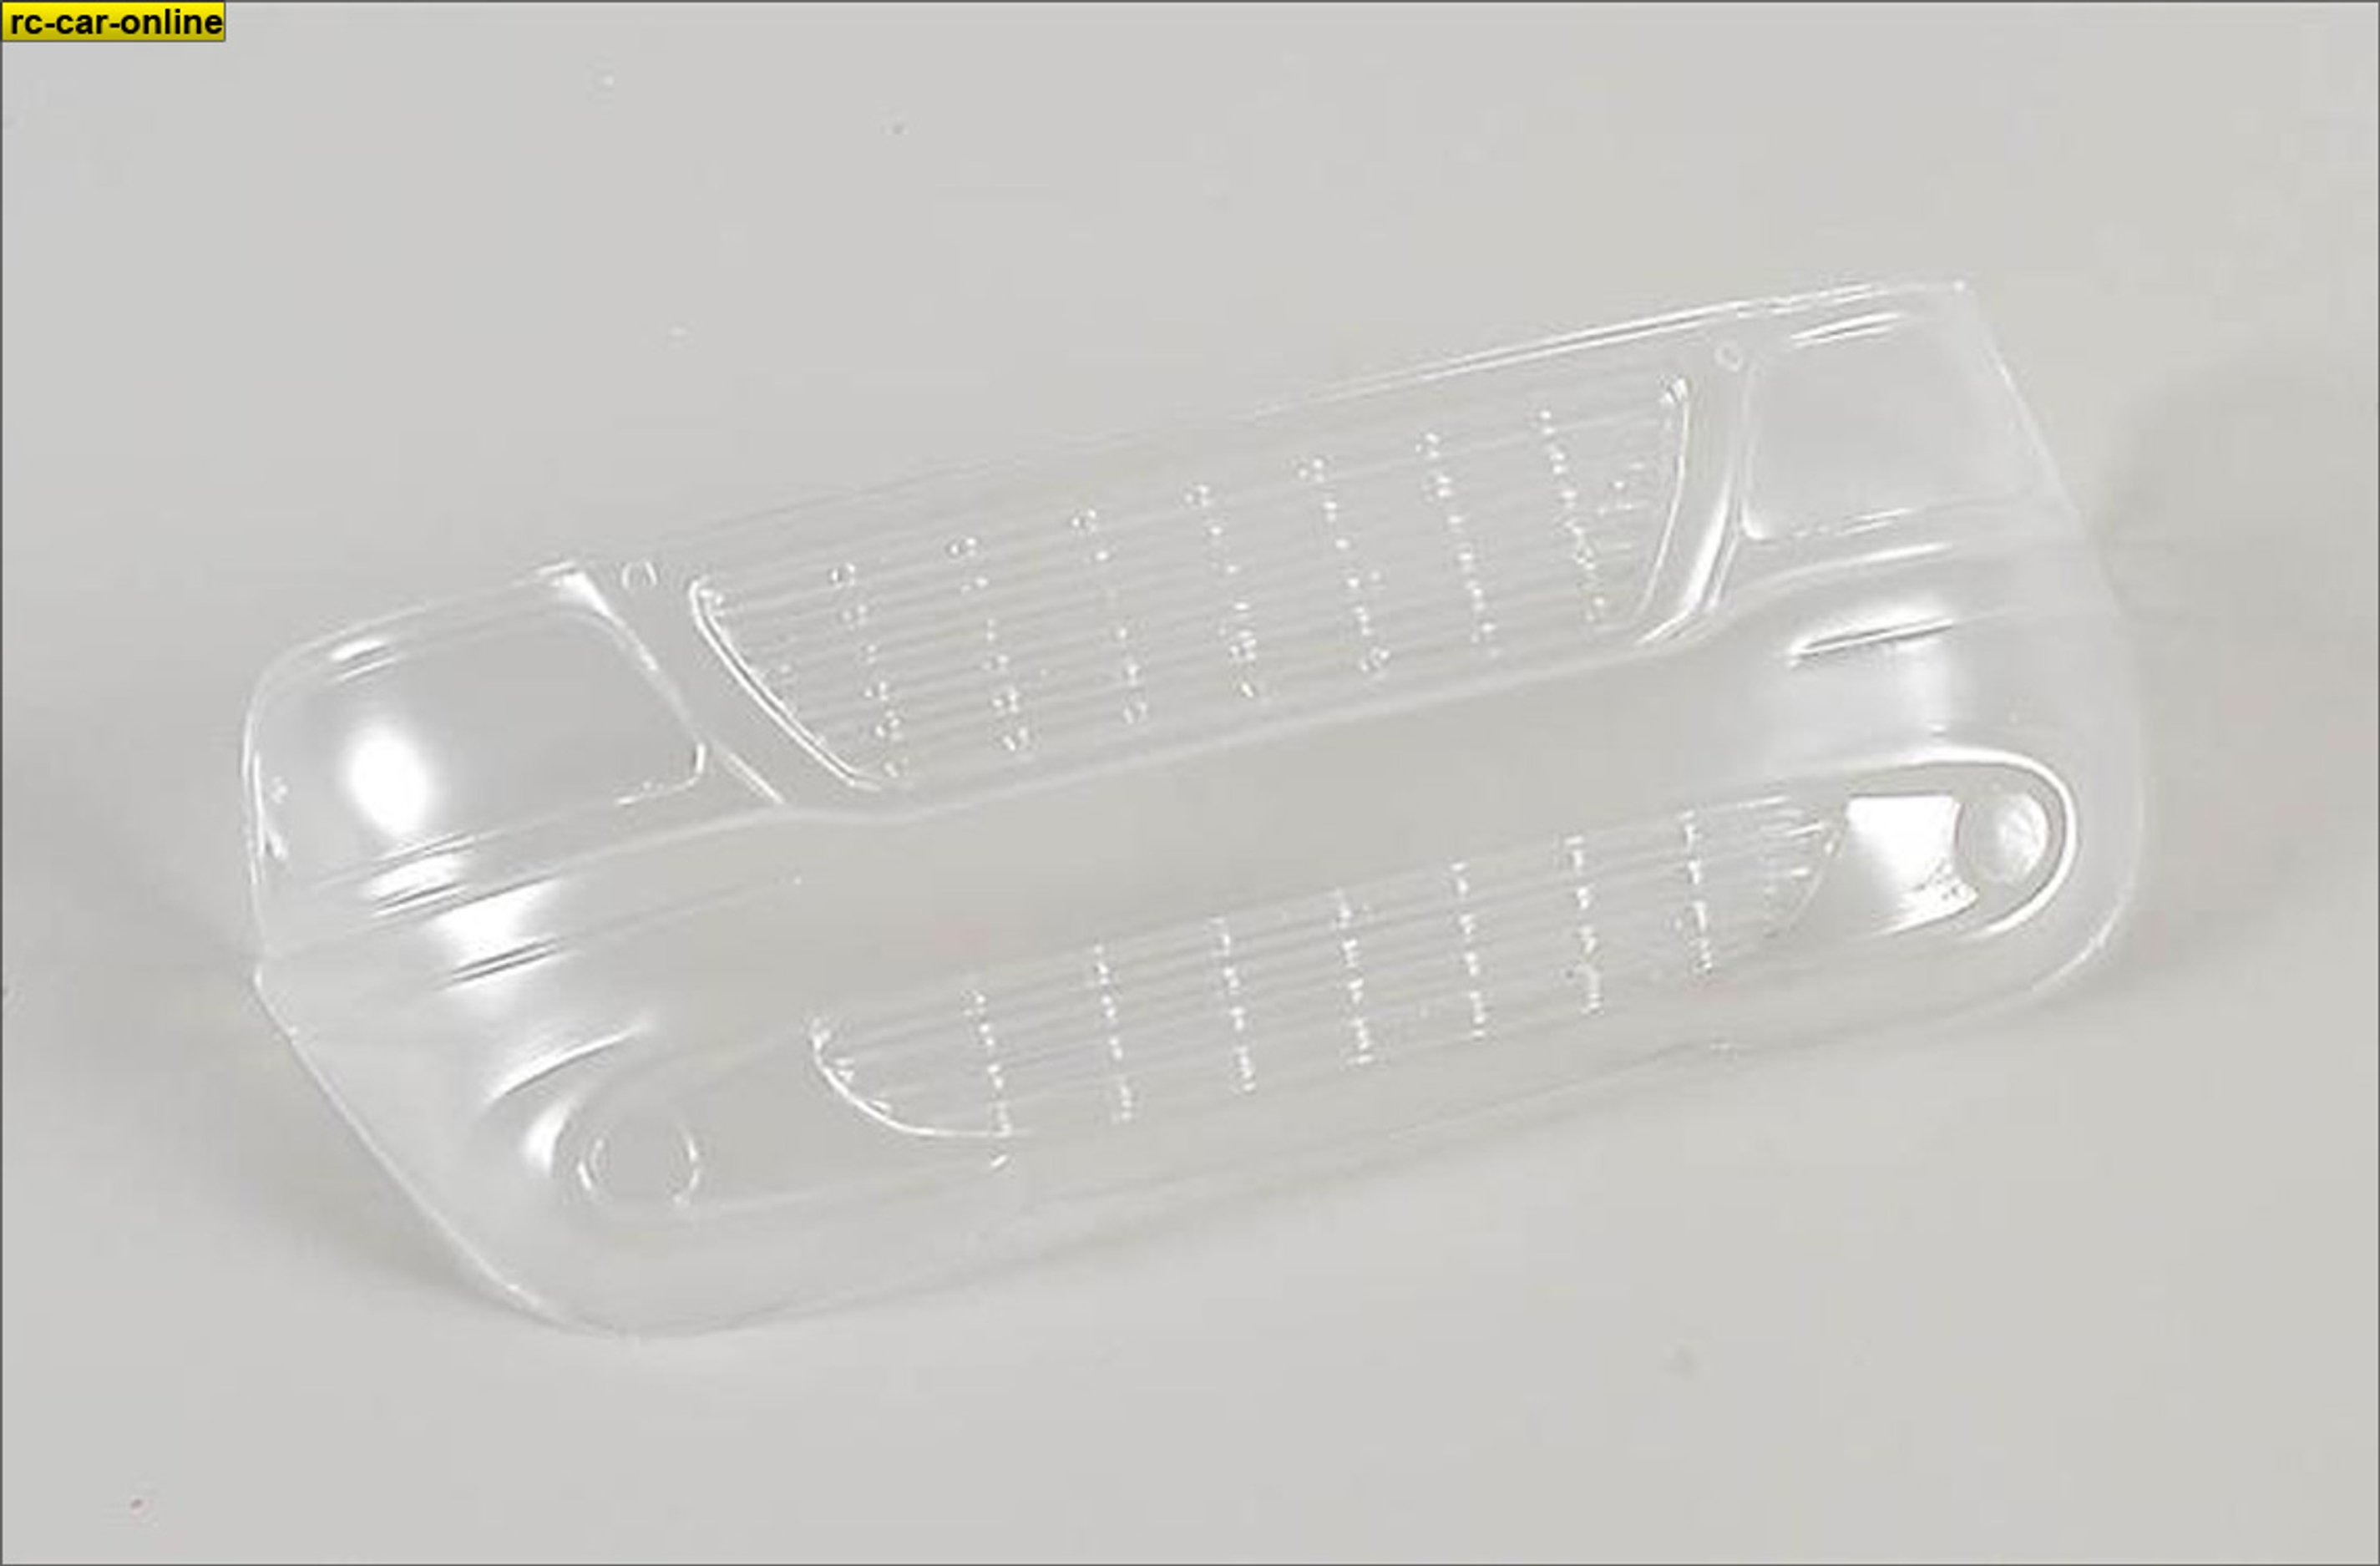 23150/02 FG Front body Monster Truck WB 535, clear, 1 pce.